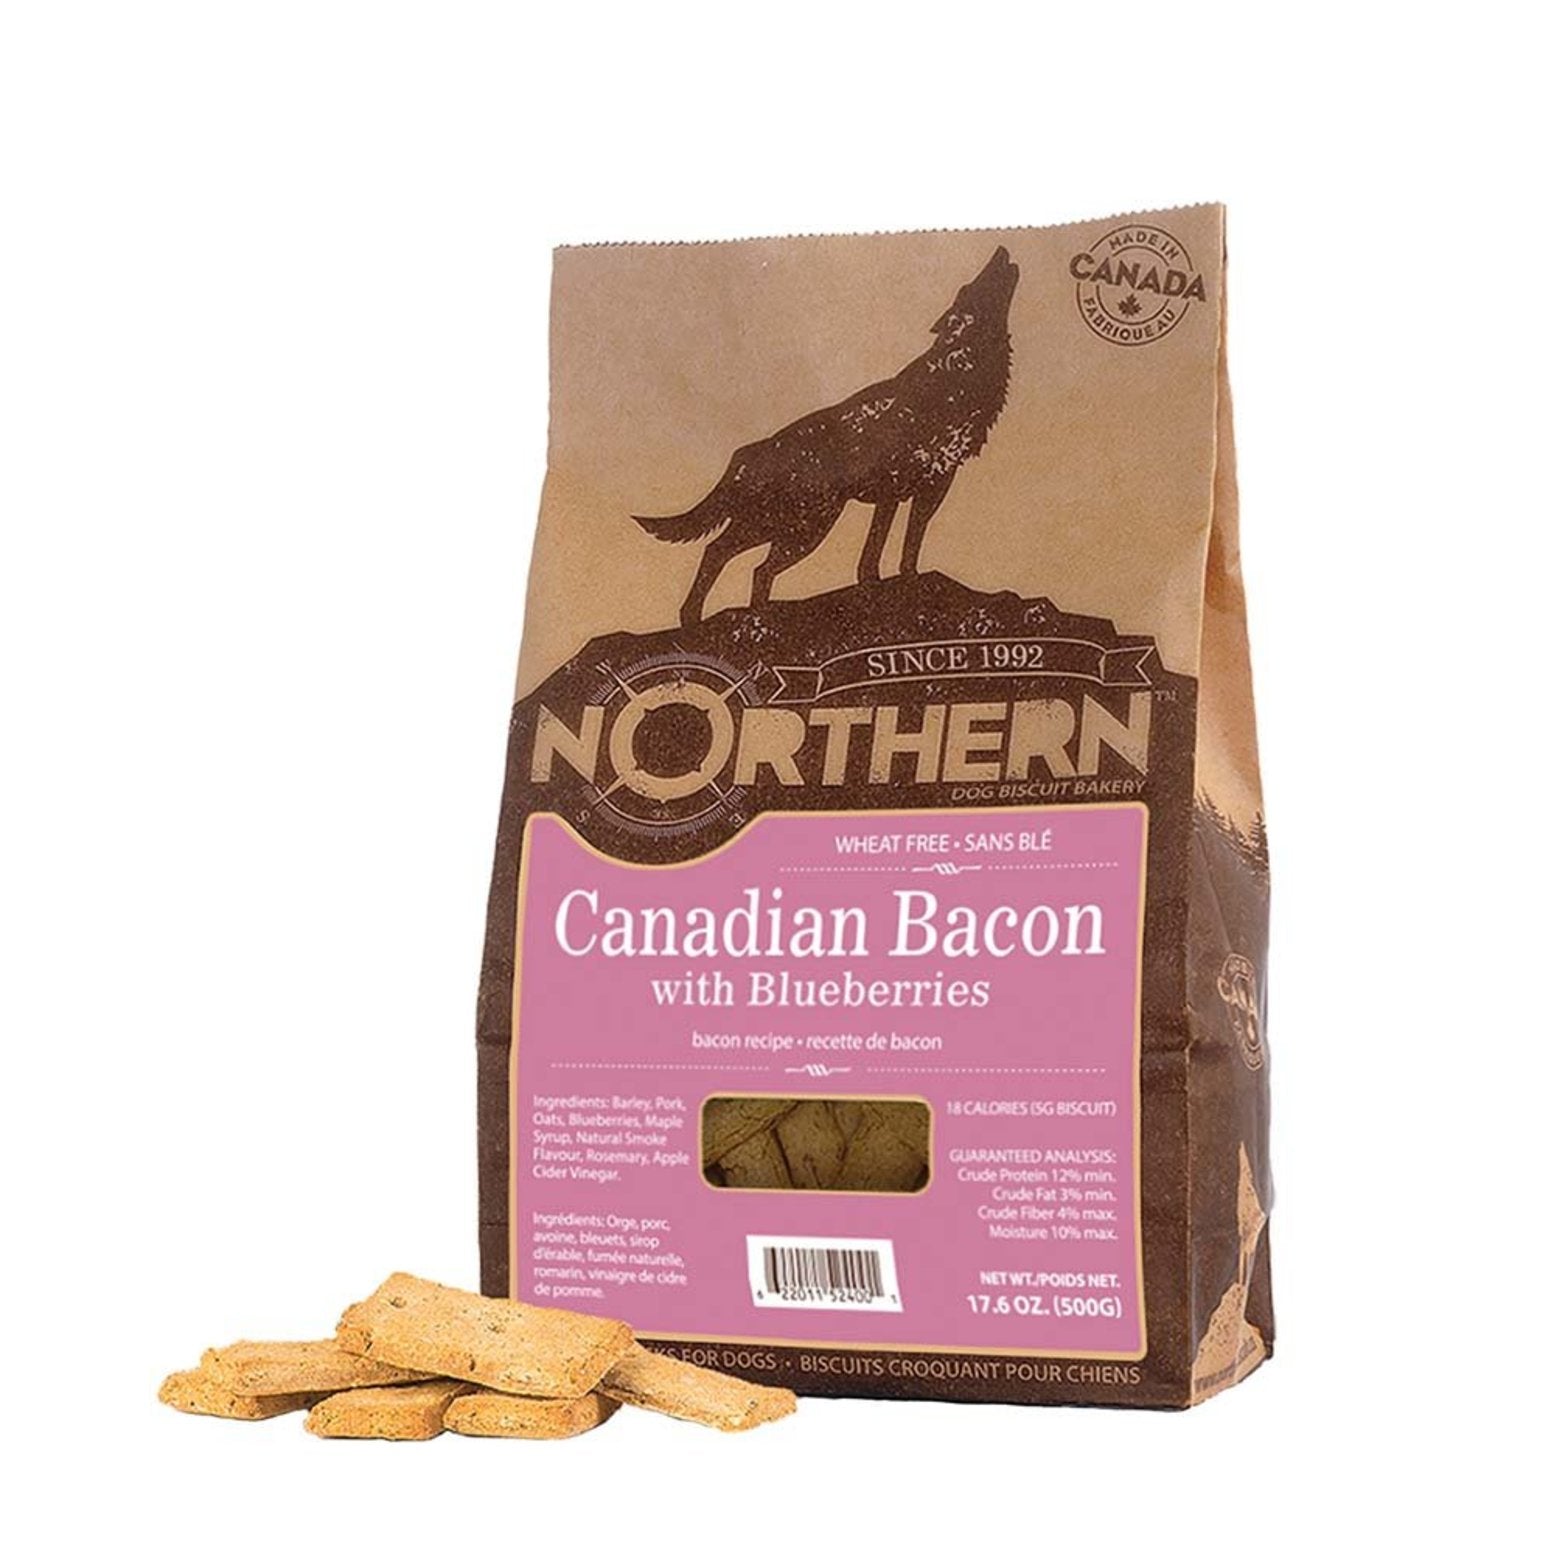 Northern Wheat Free Canadian Bacon with Blueberries (500g)